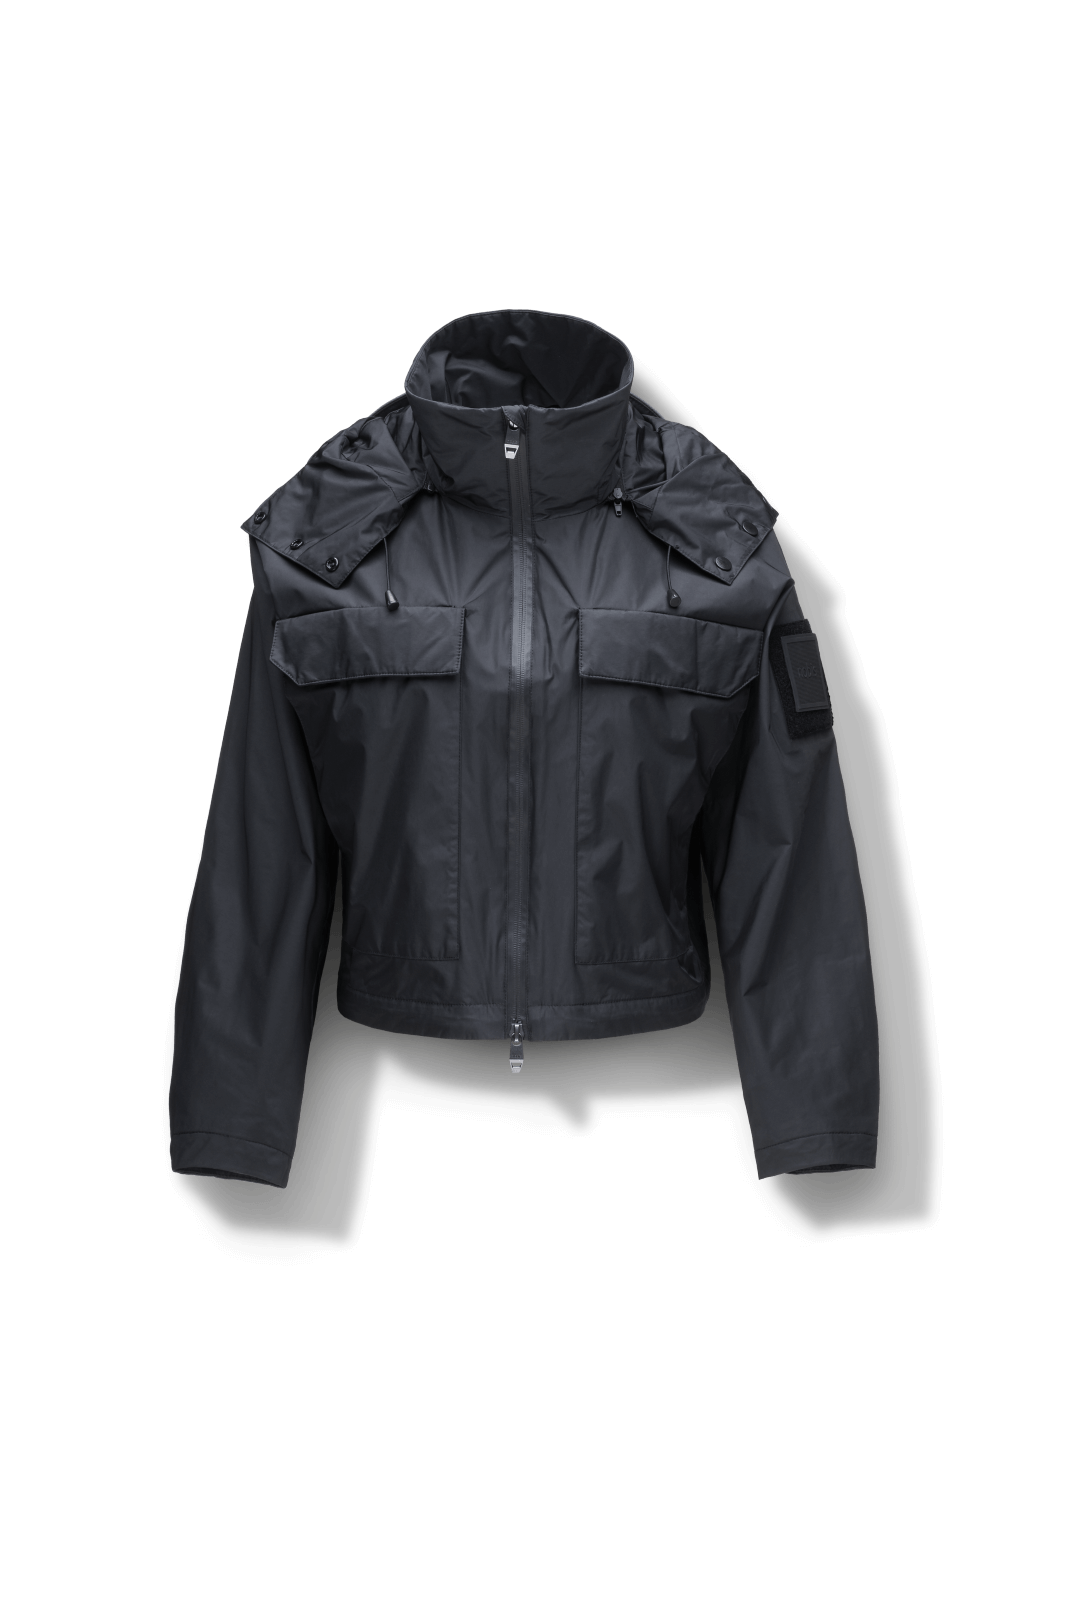 Women's Leather Bomber Jacket, Removable Hood